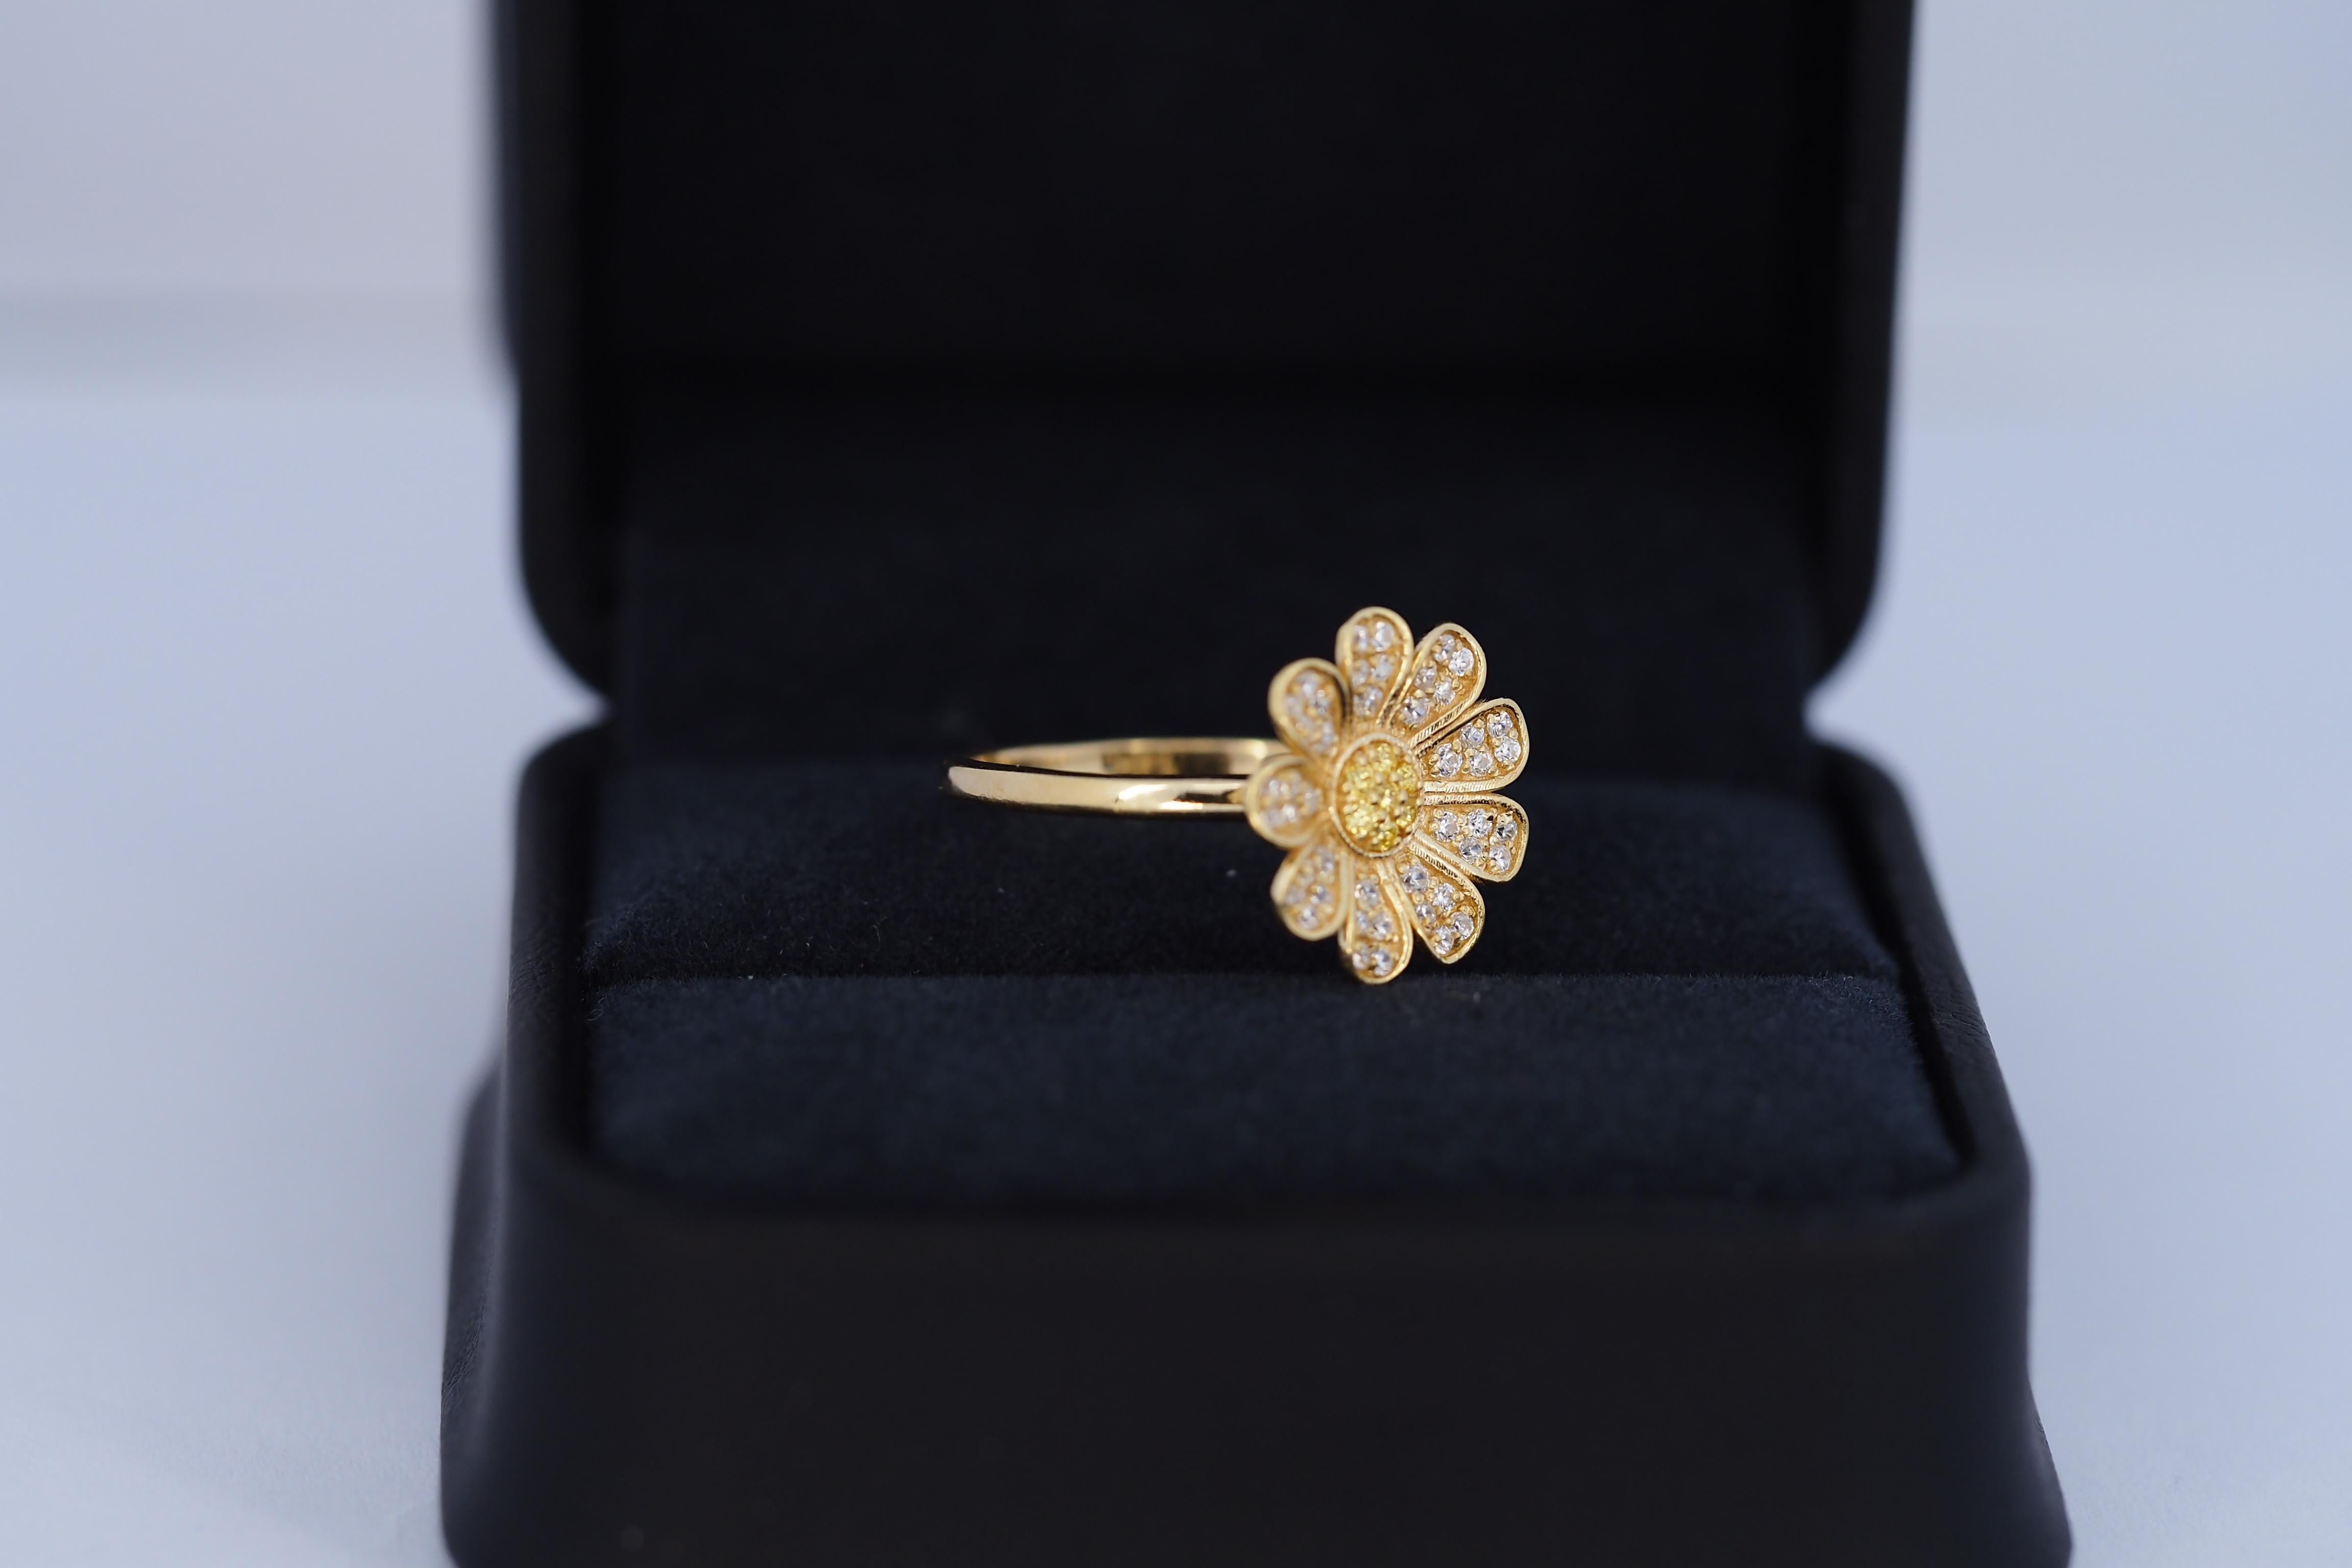 Daisy flower 14k gold ring. Love Me, Love Me Not 14k gold ring. Flora engagement ring with with moissanites and lab sapphires in 14k gold. Vintage style moissanite ring. Valentines days 14k gold ring. Lucky gold ring. 

Metal: 14k gold
Weight: 2.3